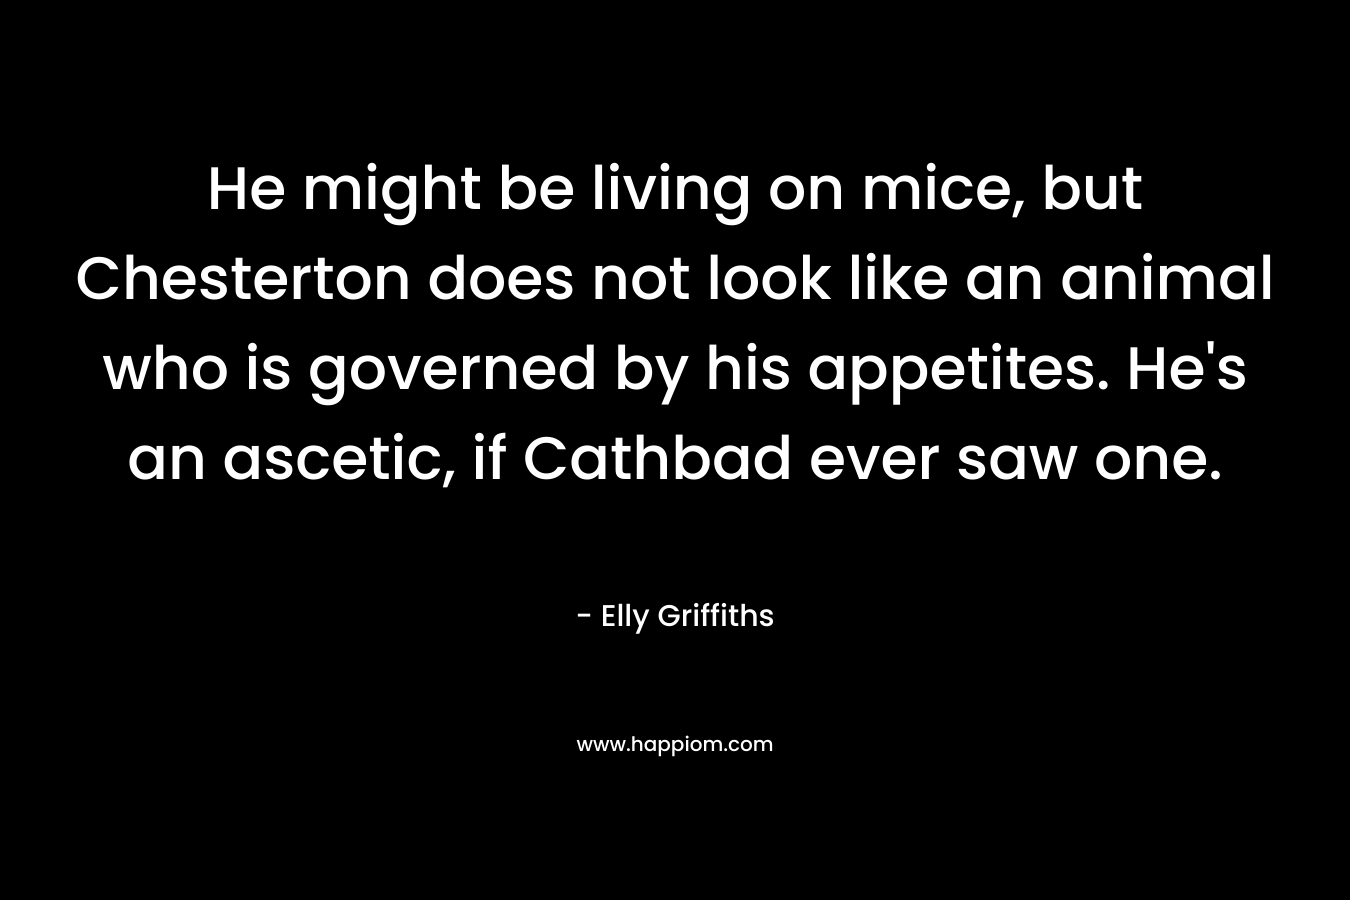 He might be living on mice, but Chesterton does not look like an animal who is governed by his appetites. He’s an ascetic, if Cathbad ever saw one. – Elly Griffiths